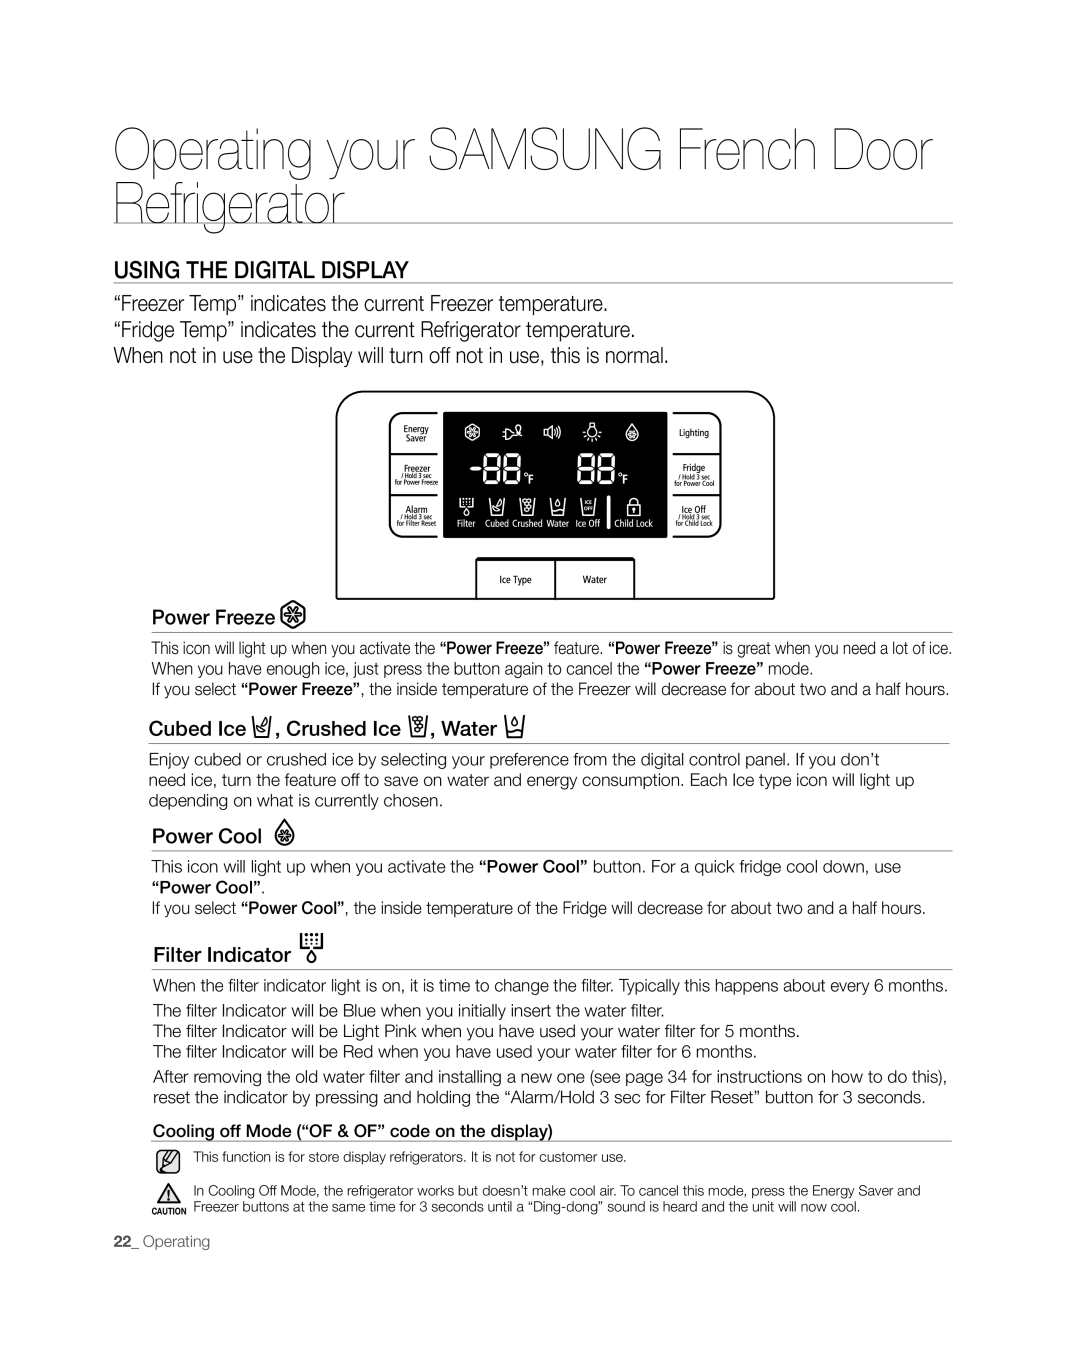 Samsung RFG297AAWP Using The Digital Display, Operating your SAMSUNG French Door Refrigerator, Power Freeze, Power Cool 